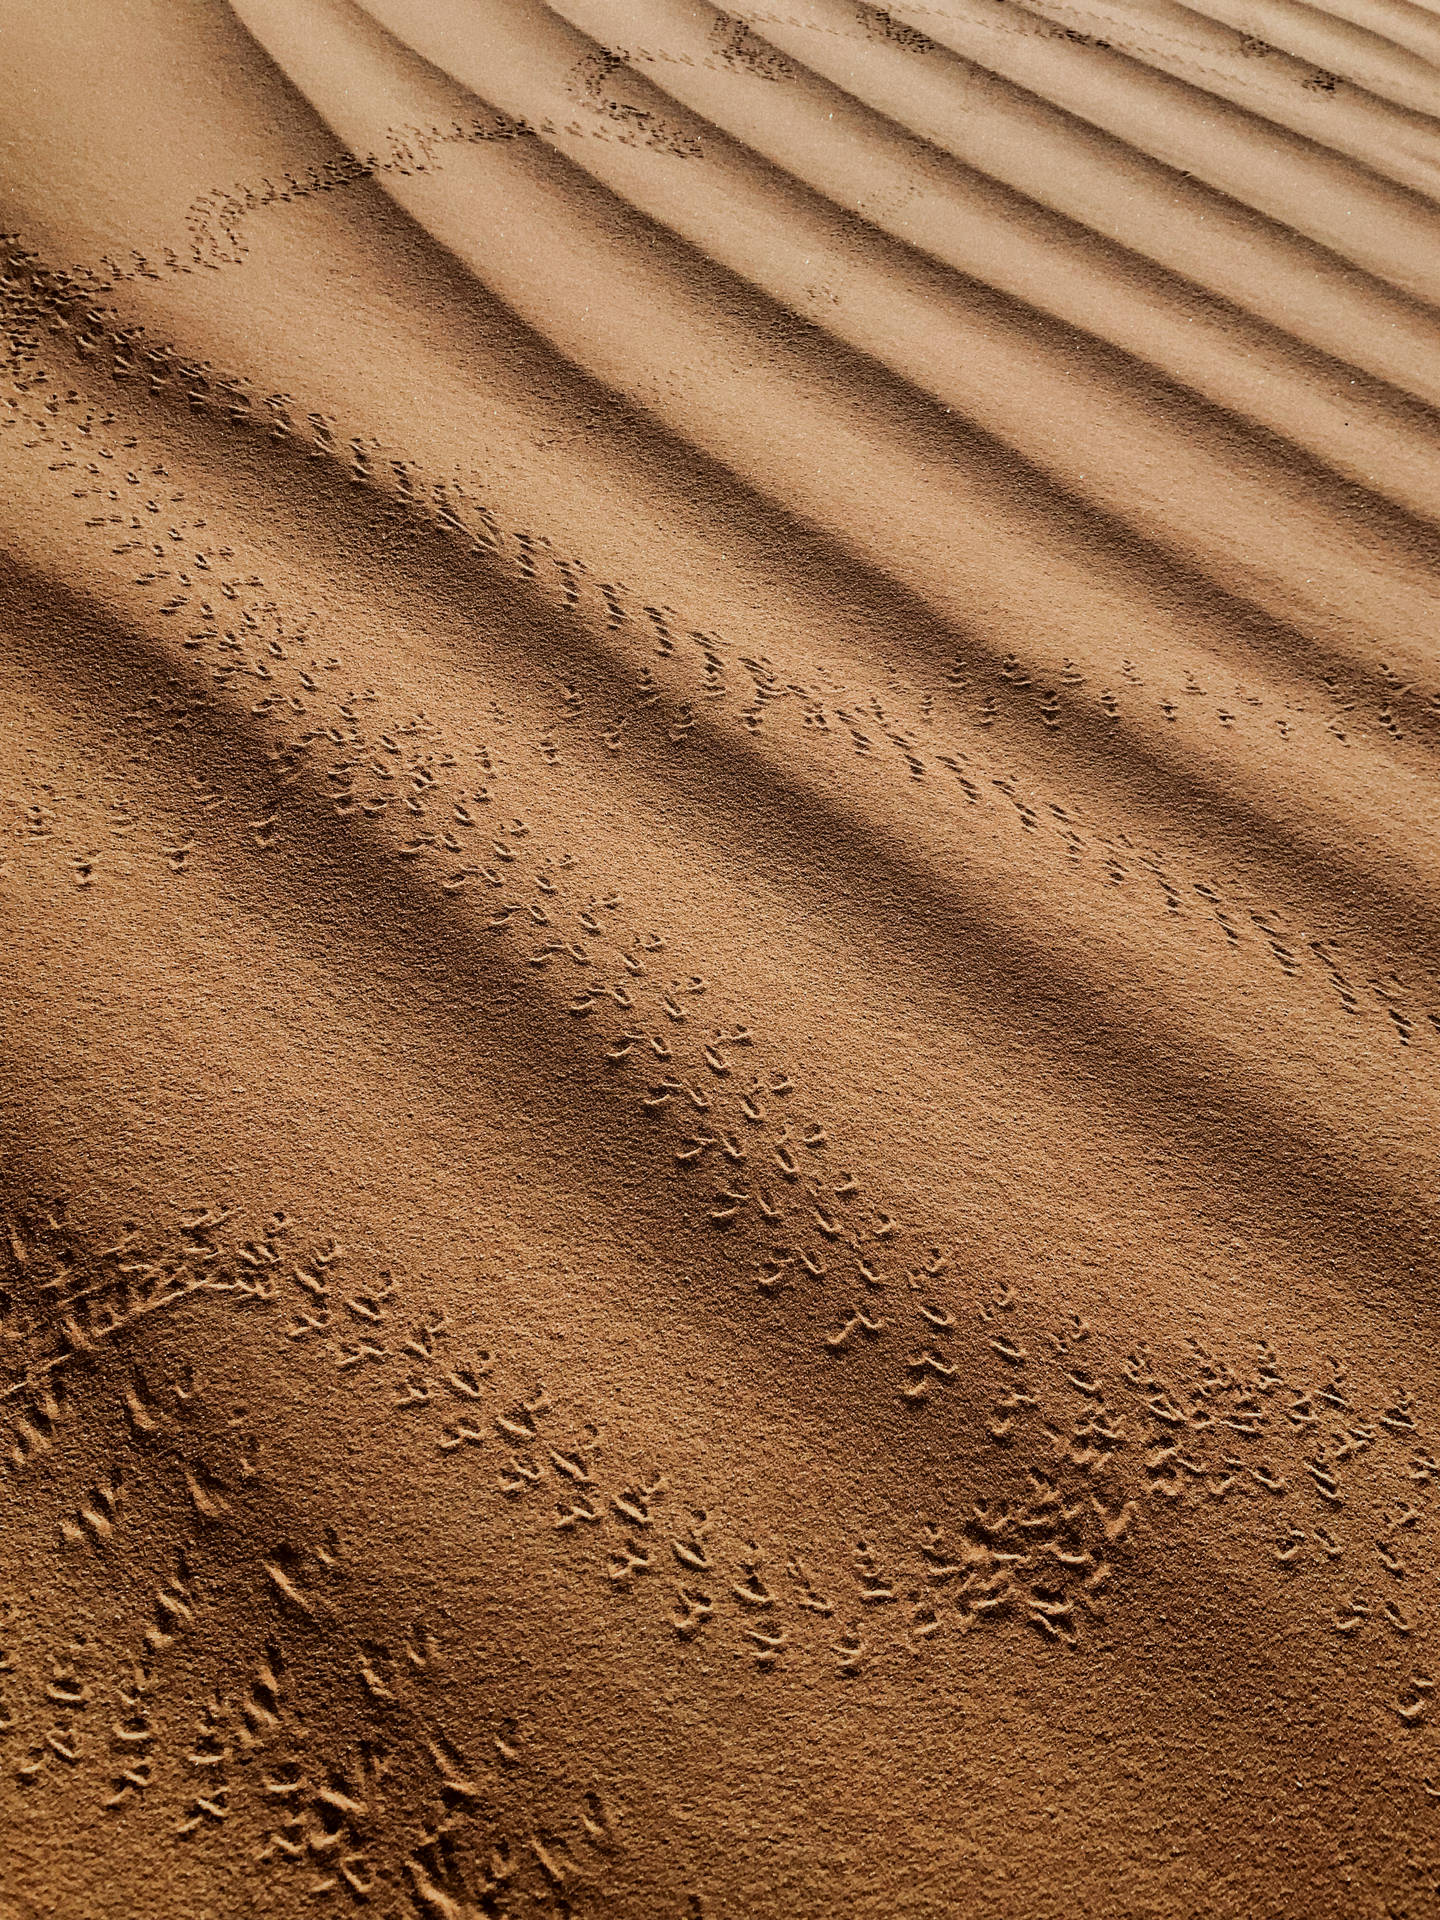 Ripples Of Sand In The Sahara